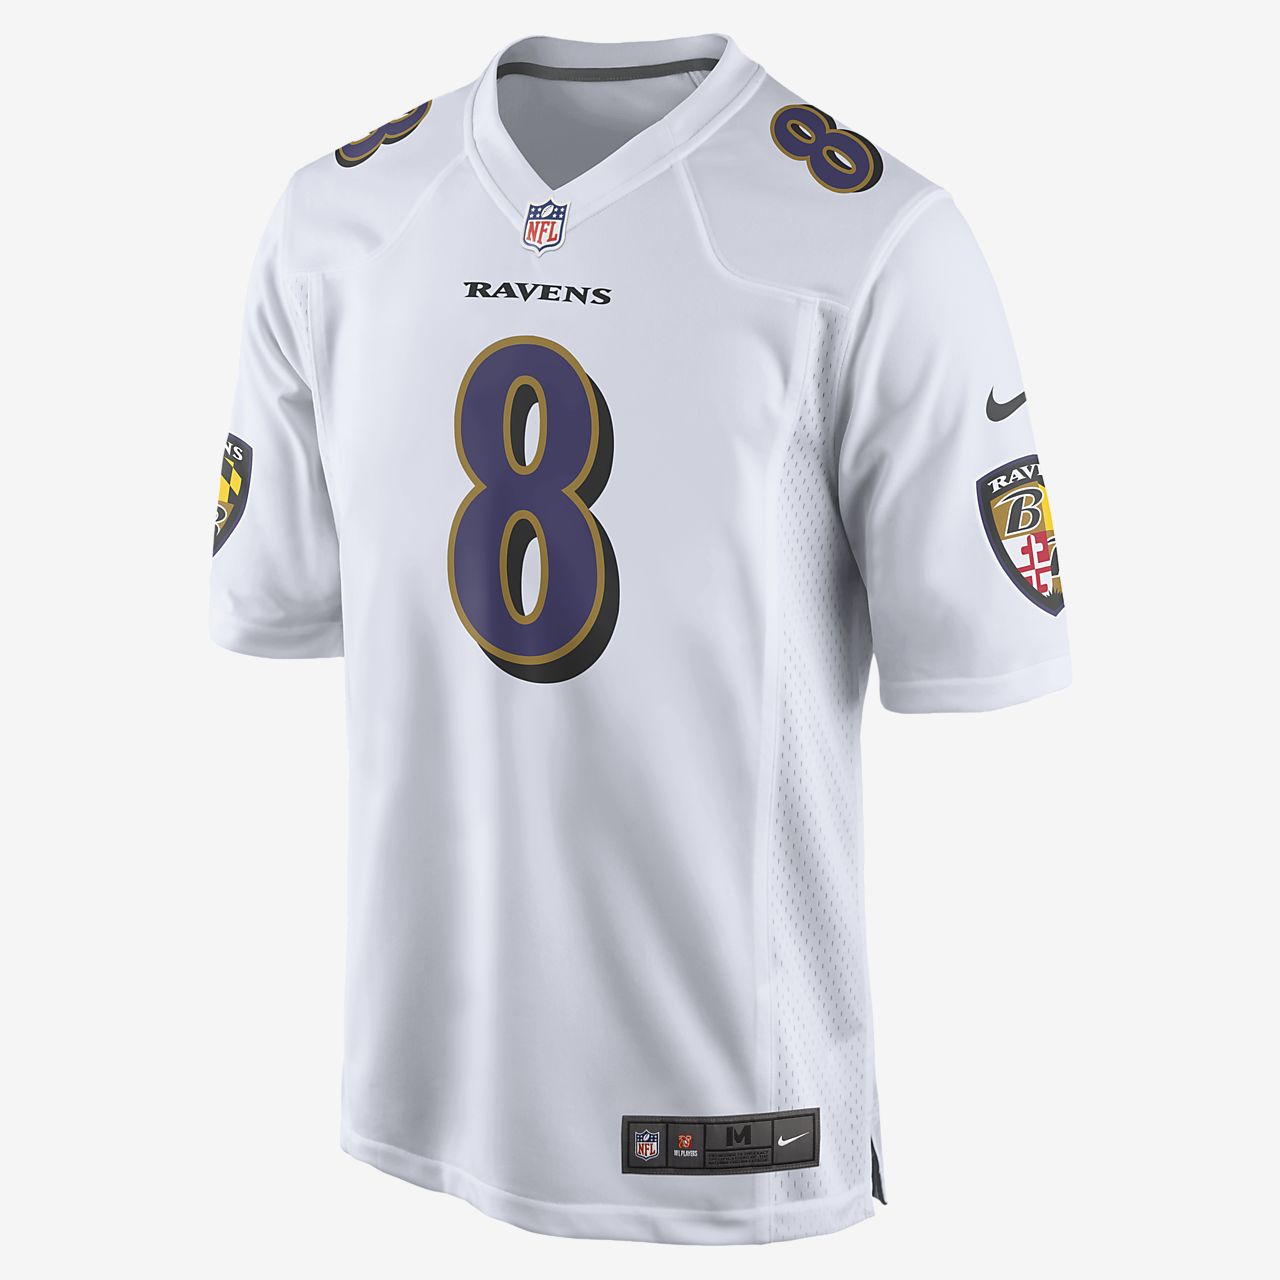 where can i buy a baltimore ravens jersey